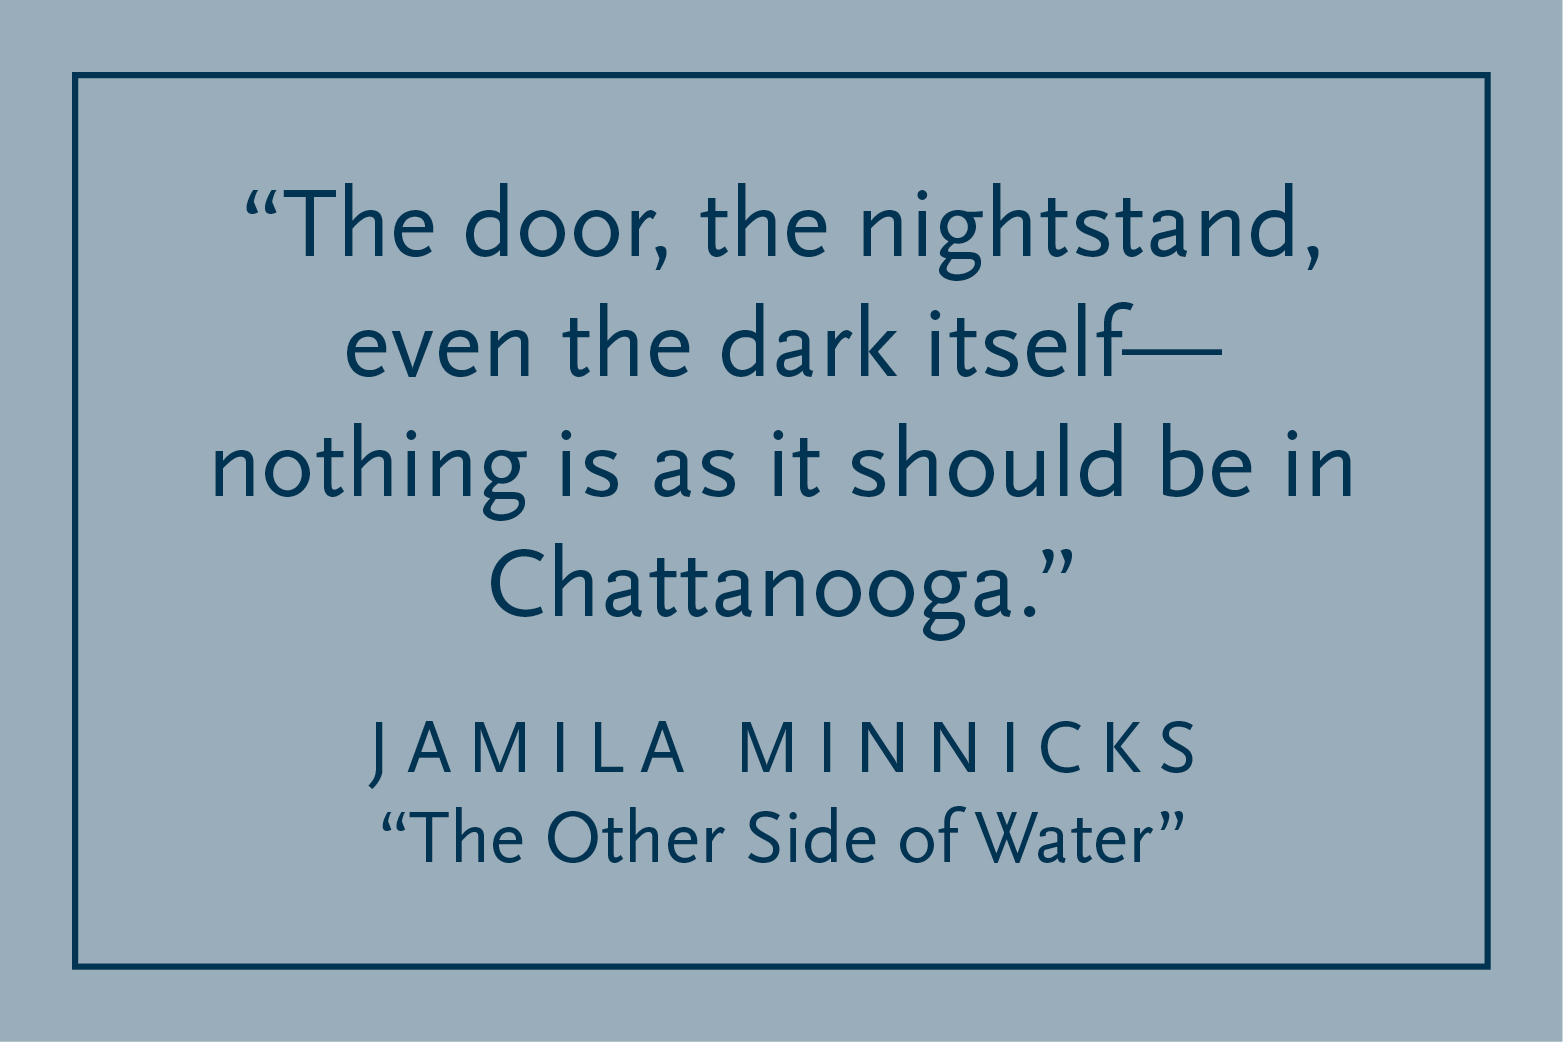 Gray background with dark blue text and a dark blue border: "The door, the nightstand, even the dark itself--nothing is as it should be in Chattanooga." Jamila Minnicks, "The Other Side of Water"